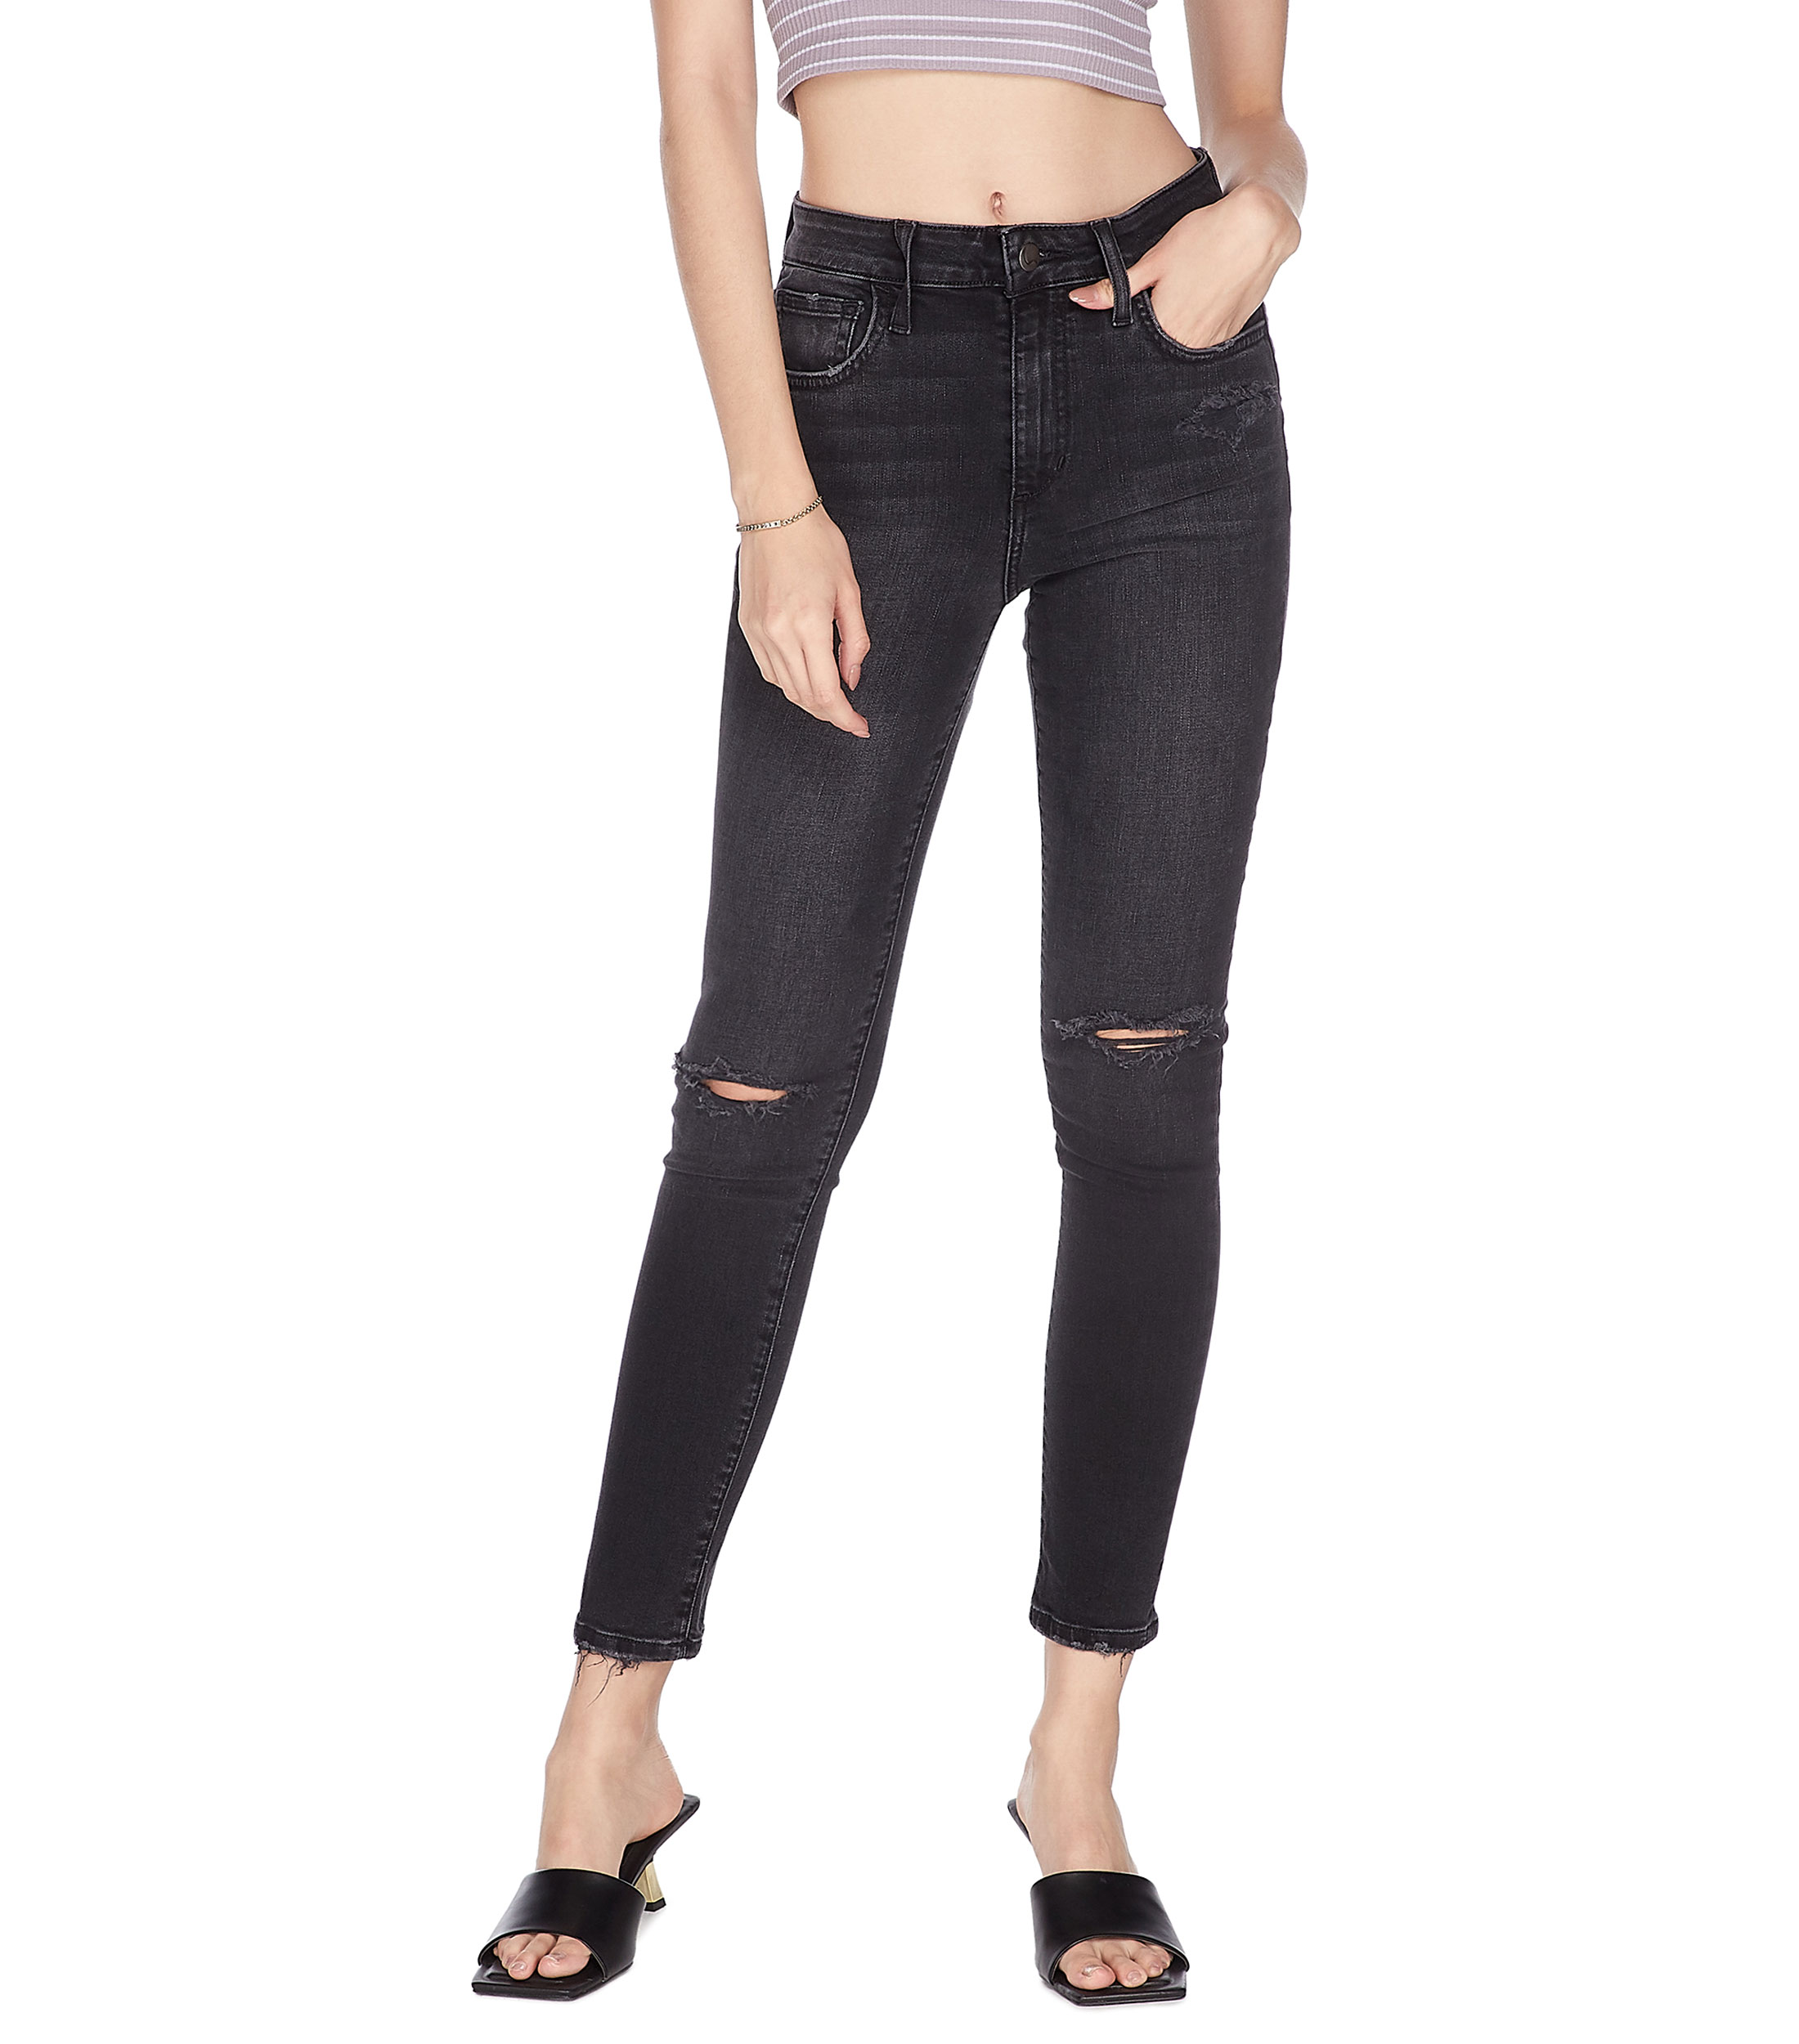 Jeans Negros Mujer Eo